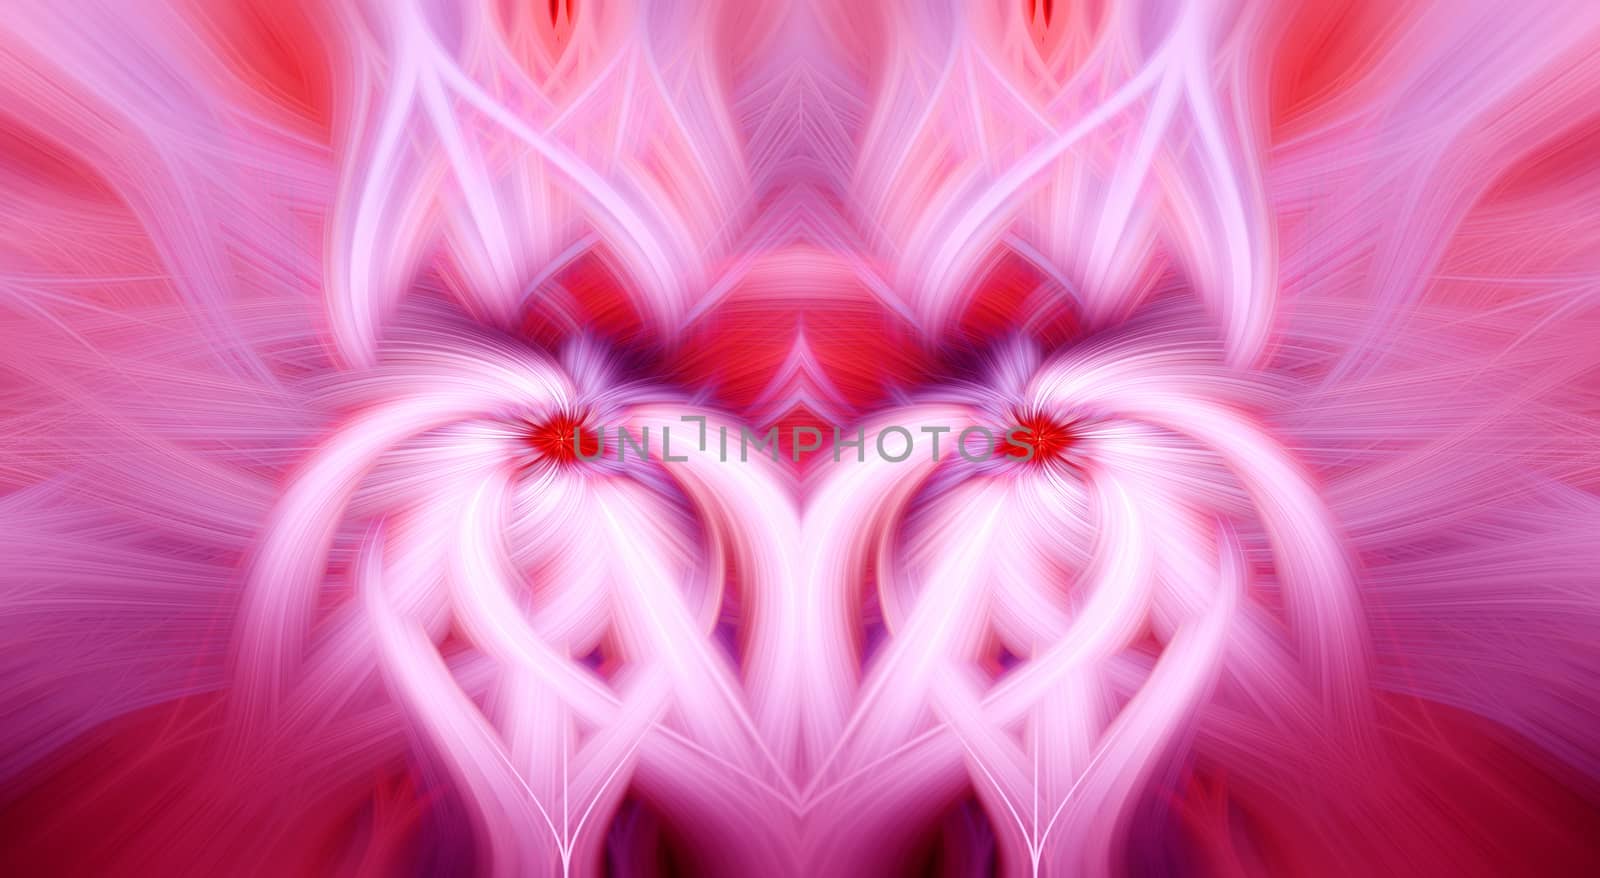 Beautiful abstract intertwined 3d fibers forming an ornament out of various symmetrical shapes. Purple, pink, red, and blue colors. Illustration.